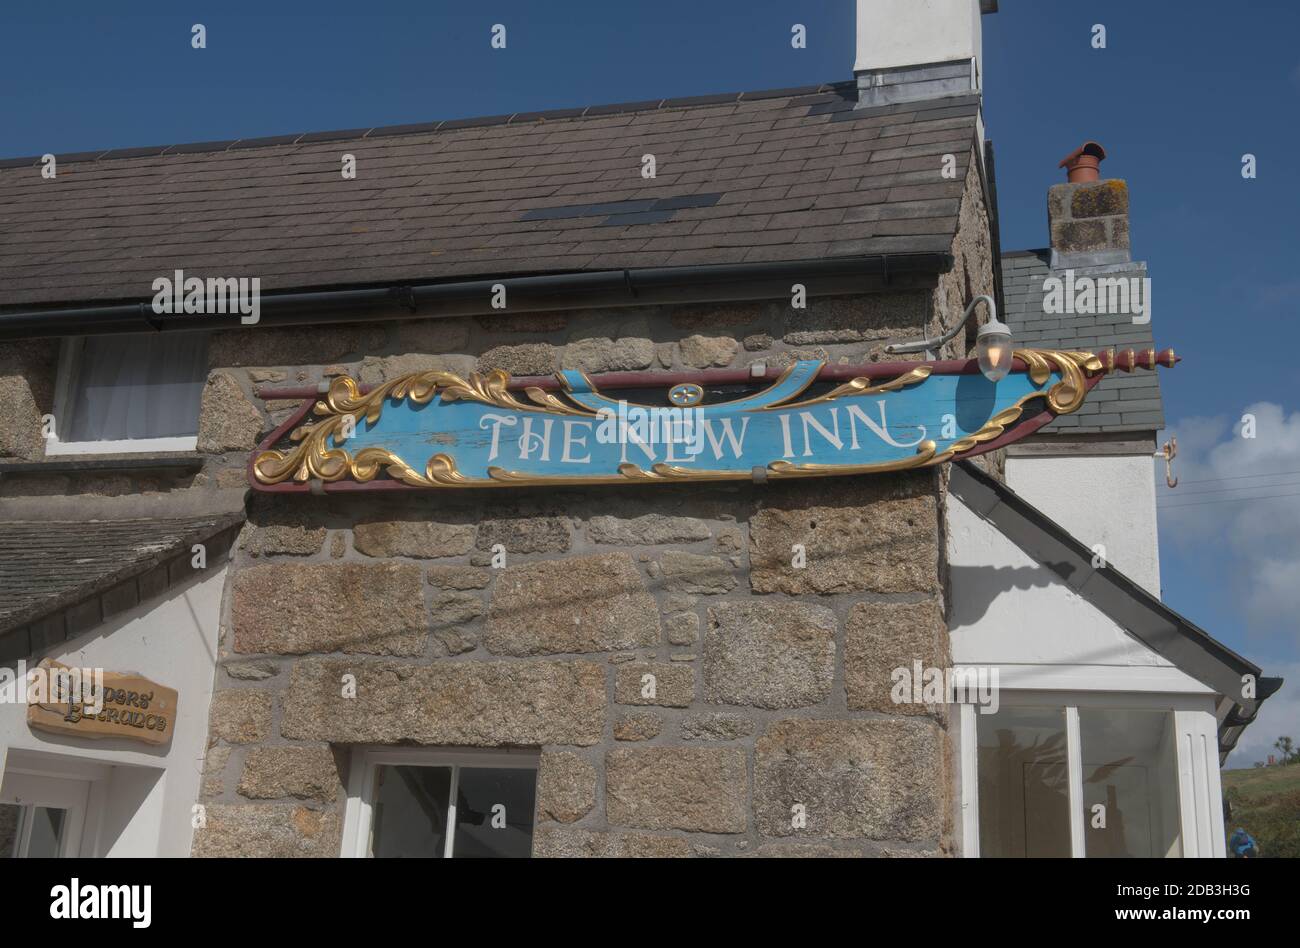 The New Inn Hotel and Pub Sign in the Harbour of New Grimsby on the Island of Tresco in the isles of Scilly, England, UK Stock Photo